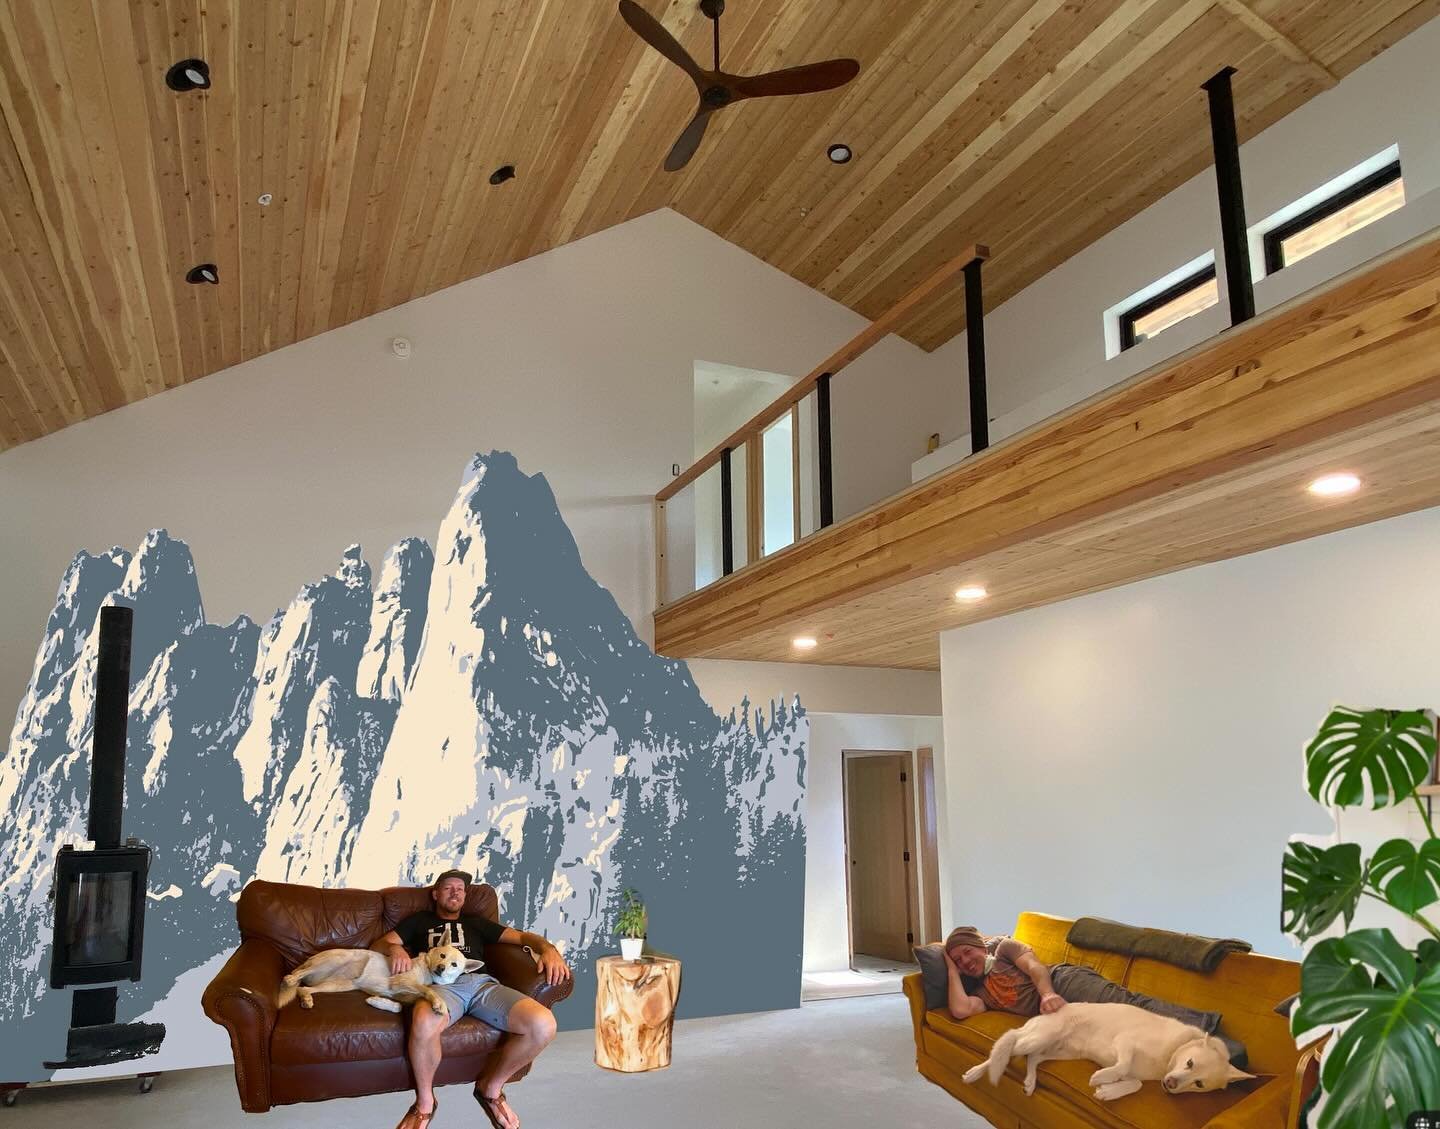 IT&rsquo;S OFFICIAL- we&rsquo;re OPENING JULY 22nd! The calendar&rsquo;s now open bookings in our 7 new private rooms and 2 shared dorms. 
This is a real photo of Paul &amp; Lucy relaxing after finishing the new-and-improved North Cascades Mountain H